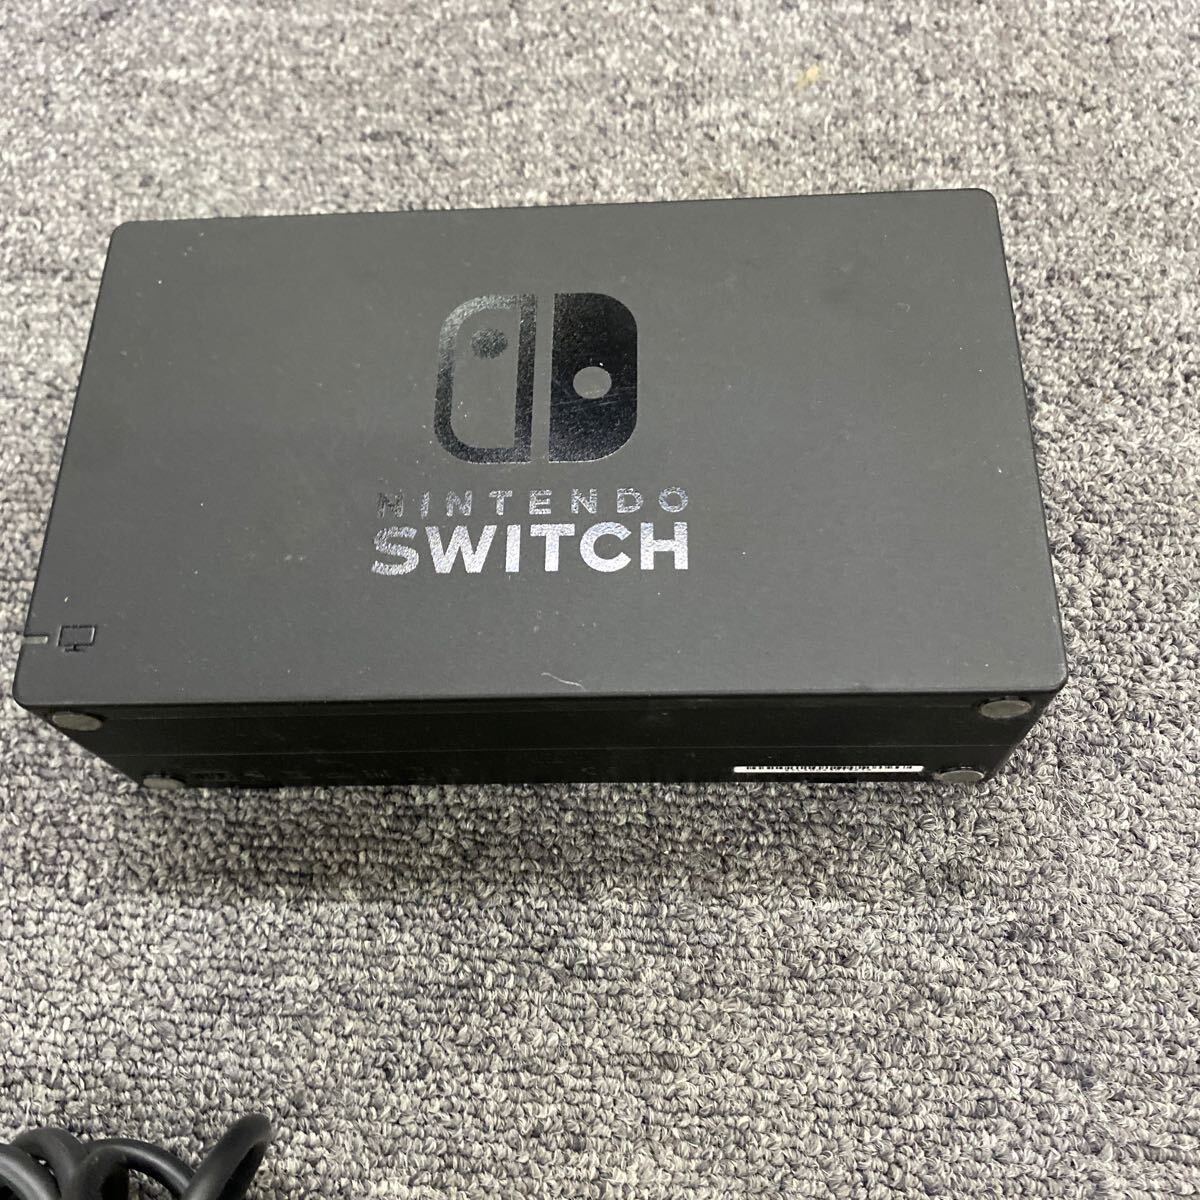 05225 Nintendo Switch body Joy navy blue Red Bull - Nintendo switch HAC-001 2019 year simple operation verification ending the first period .